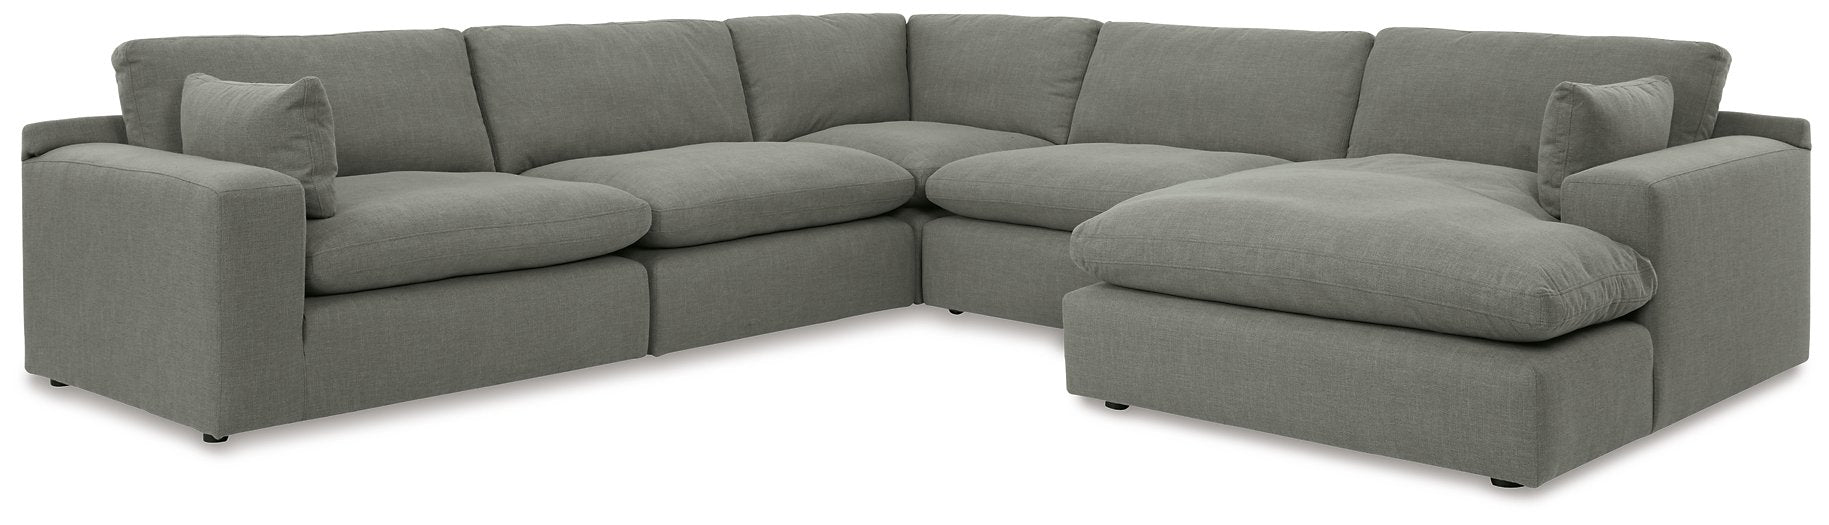 Elyza 5-Piece Sectional with Chaise